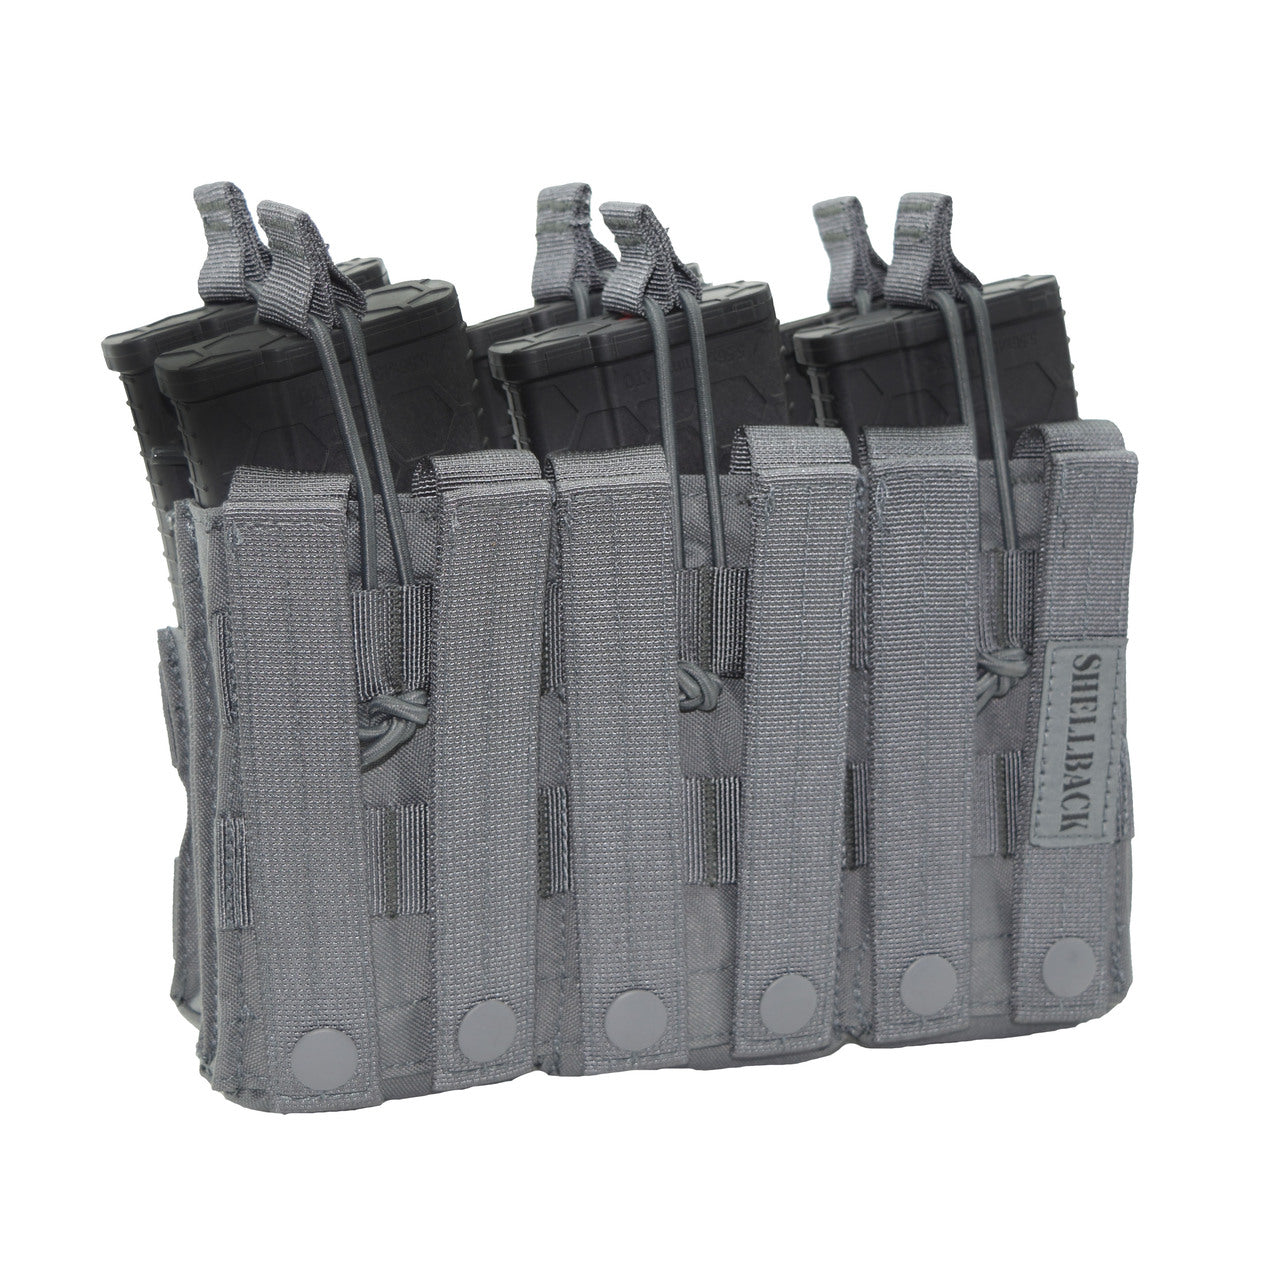 Three Shellback Tactical Triple Stacker Open Top M4 Mag Pouches on a white background.